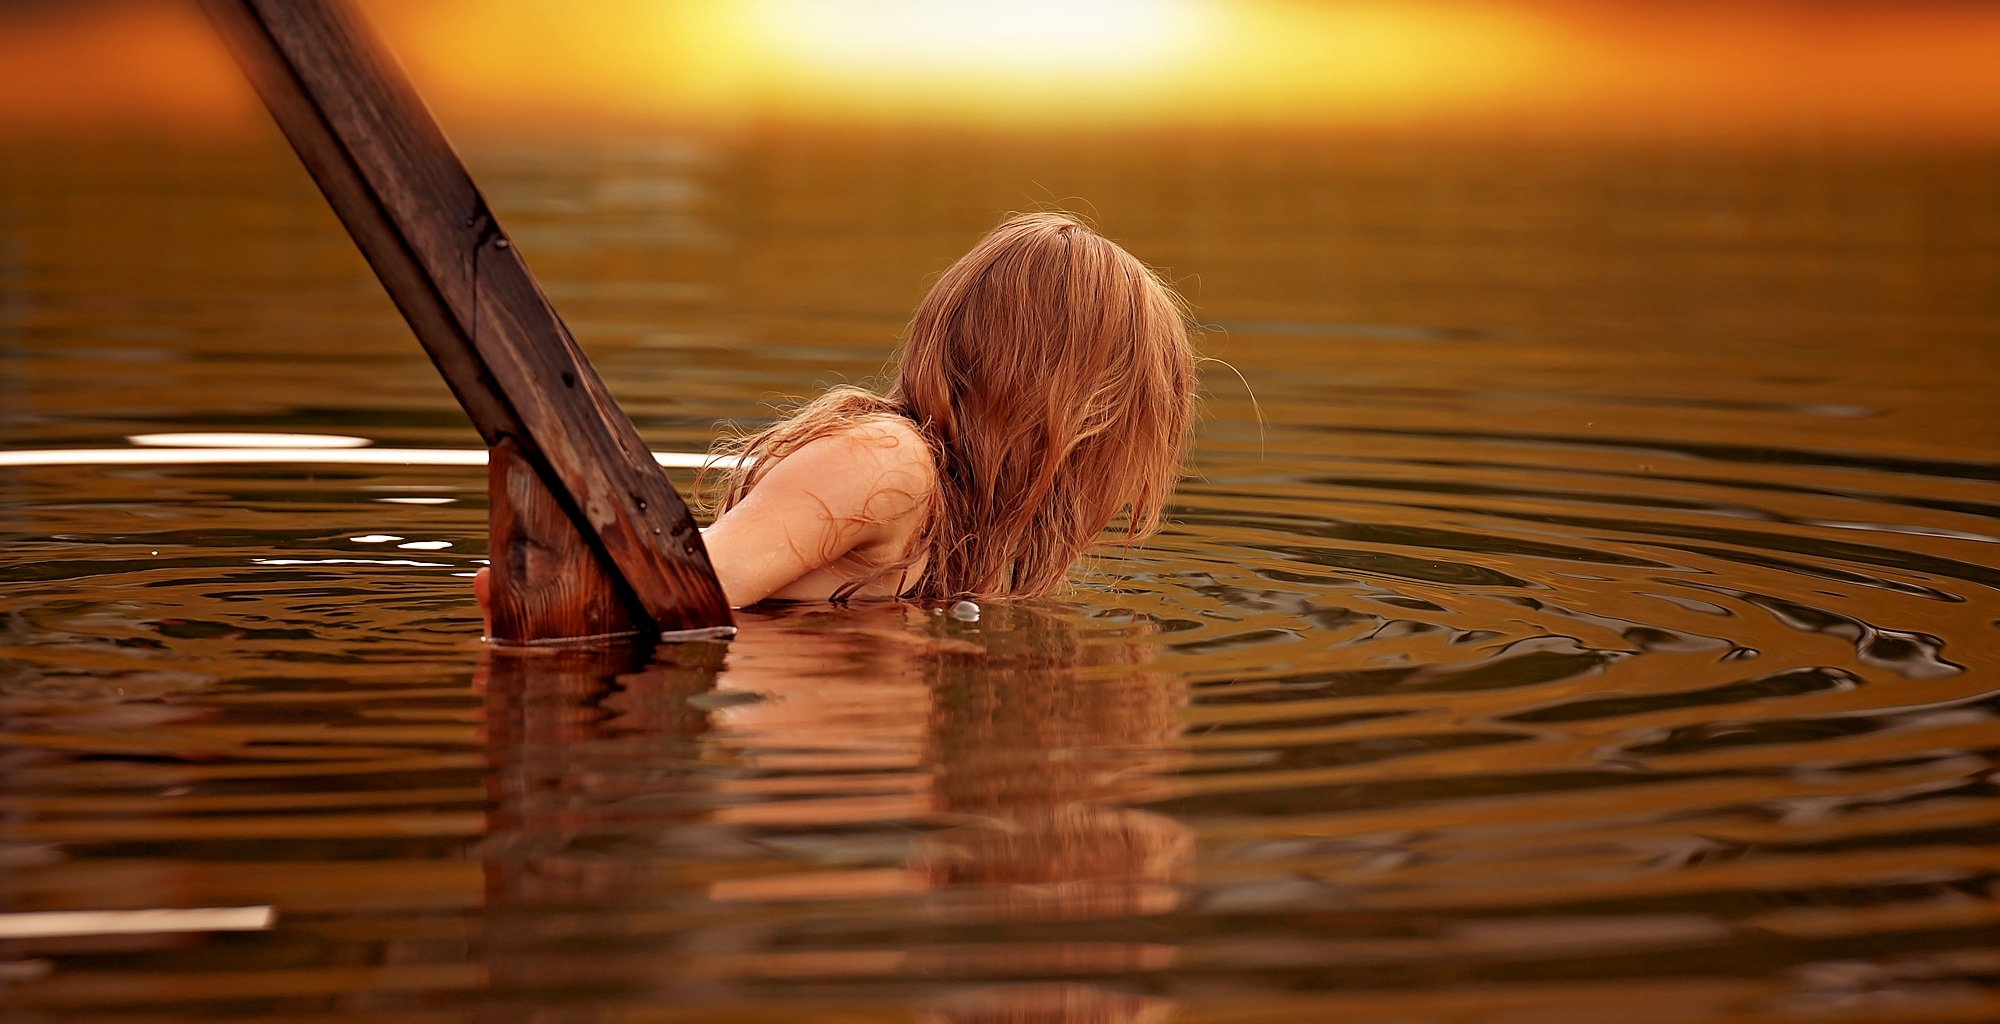 woman half dip on body of water near brown wooden handle